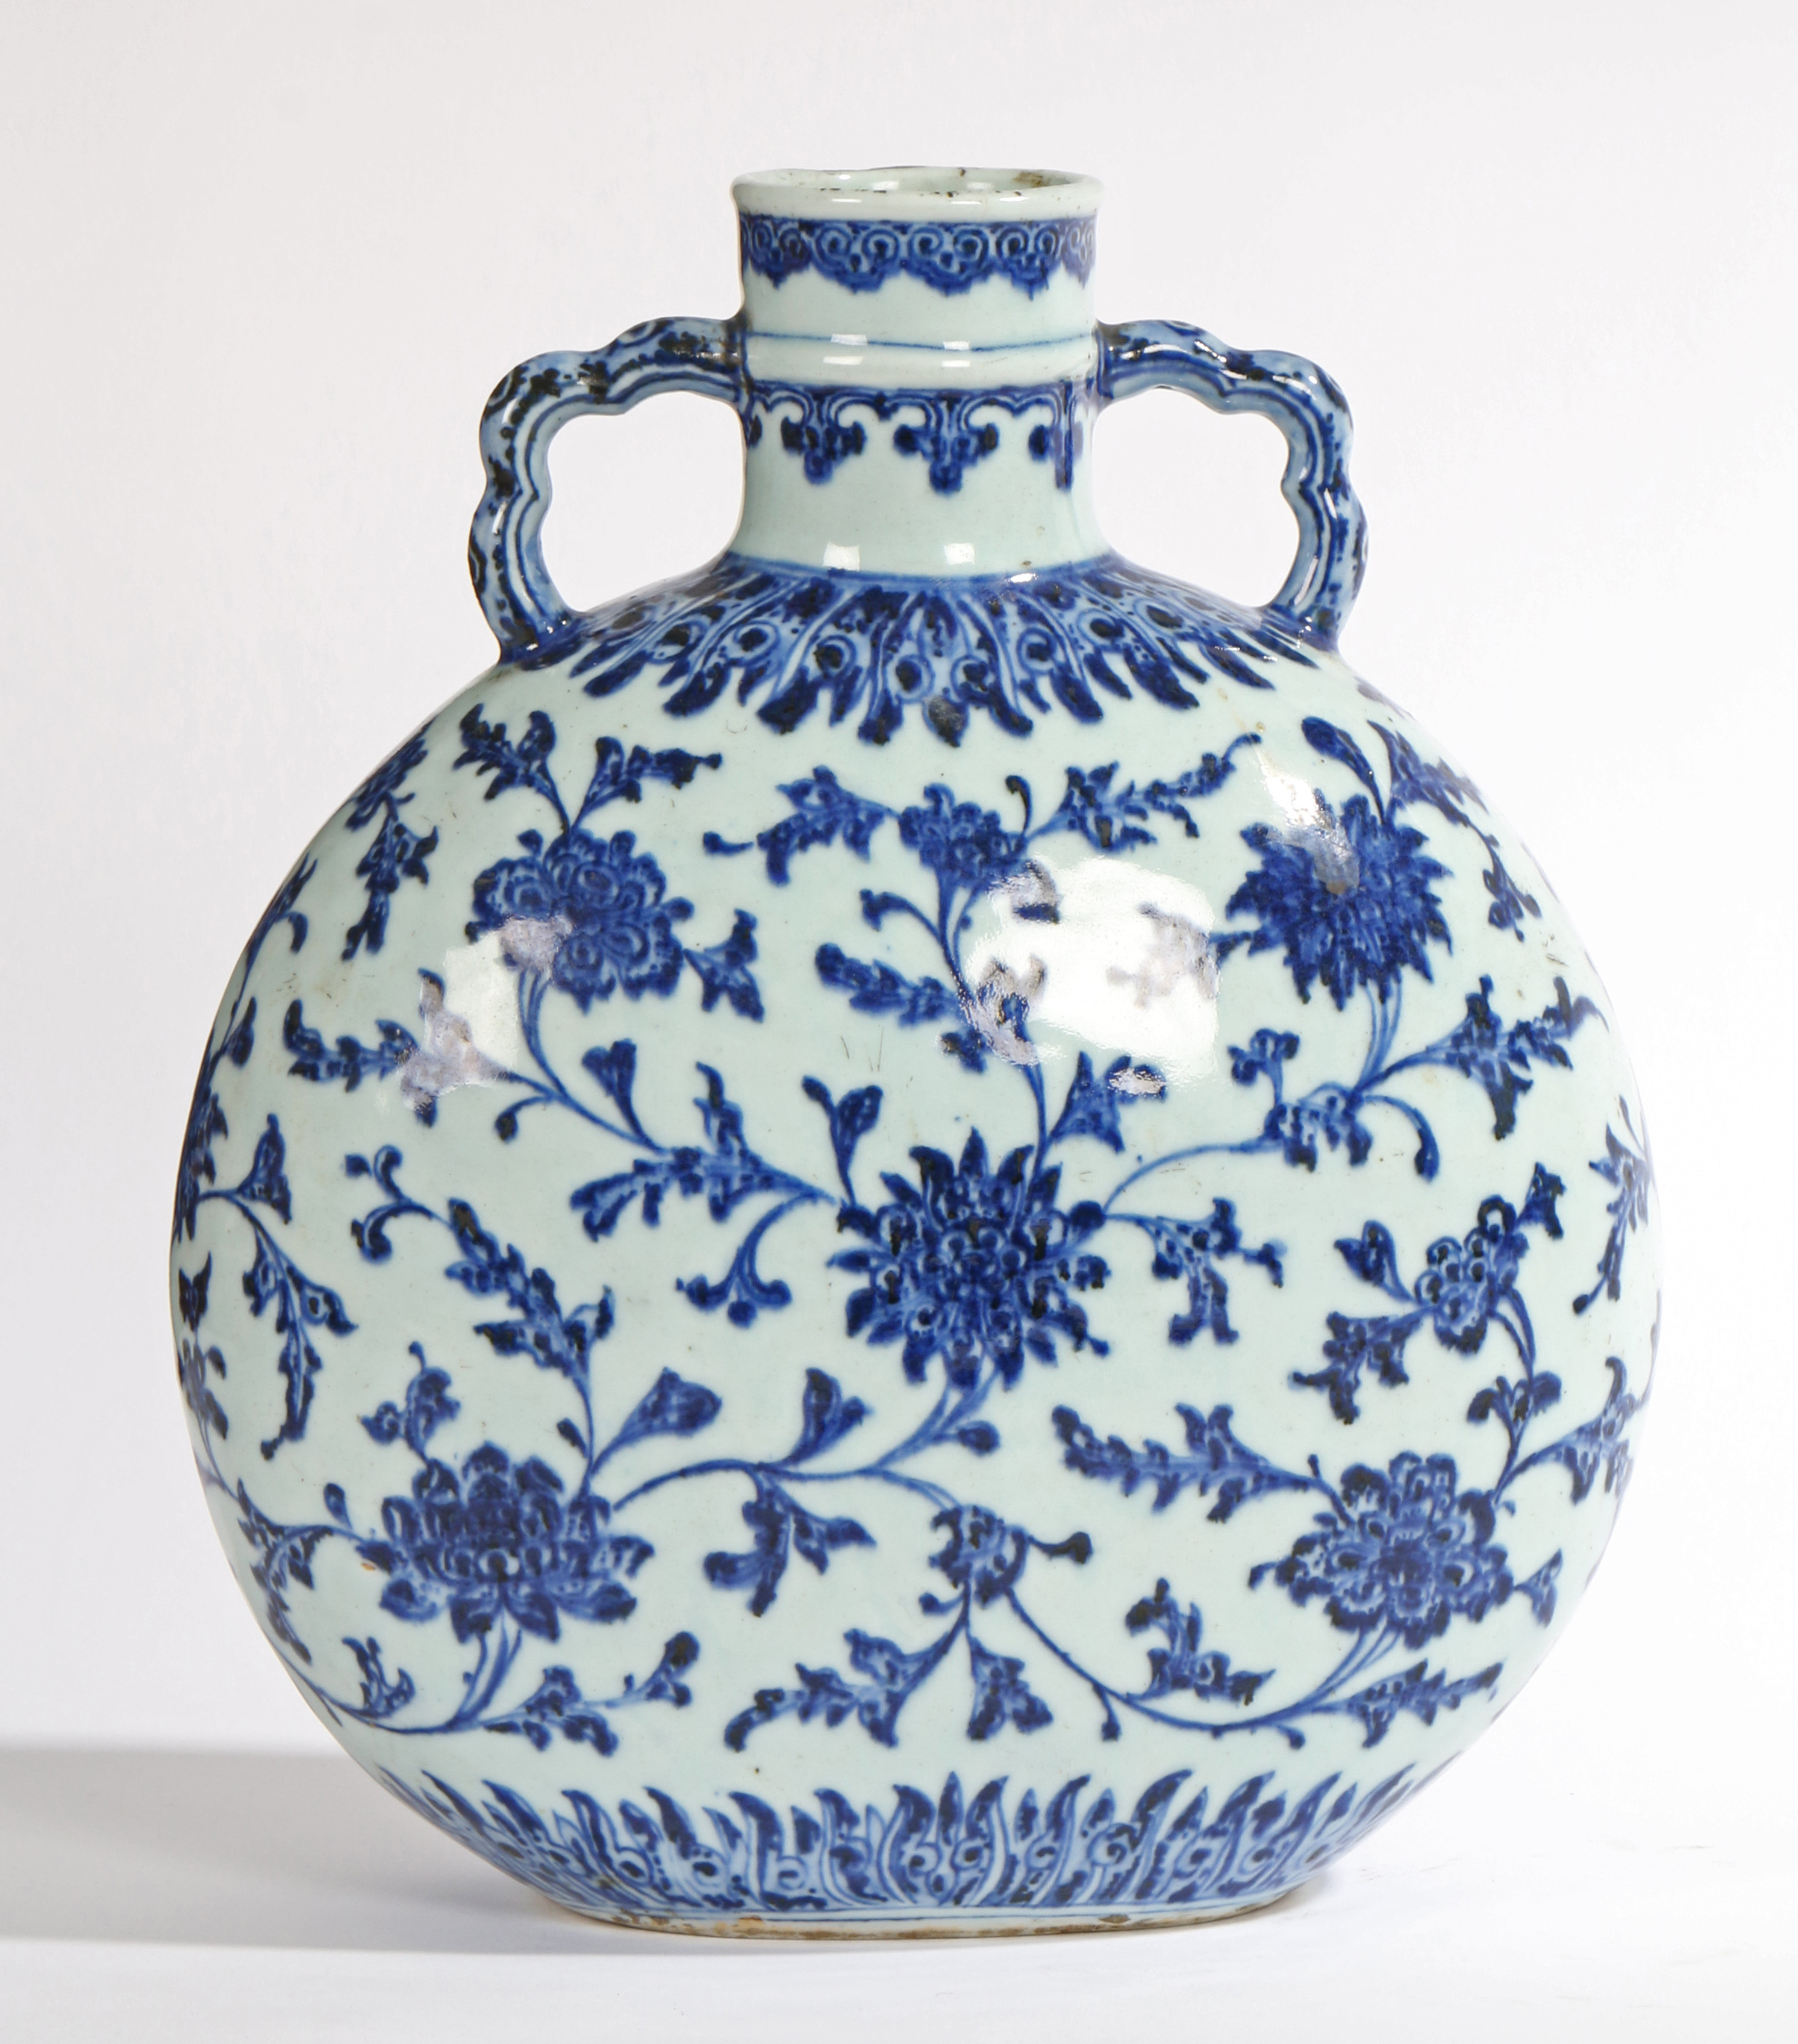 A MING-STYLE BLUE AND WHITE MOONFLASK QING DYNASTY, 18TH CENTURY. - Image 2 of 4